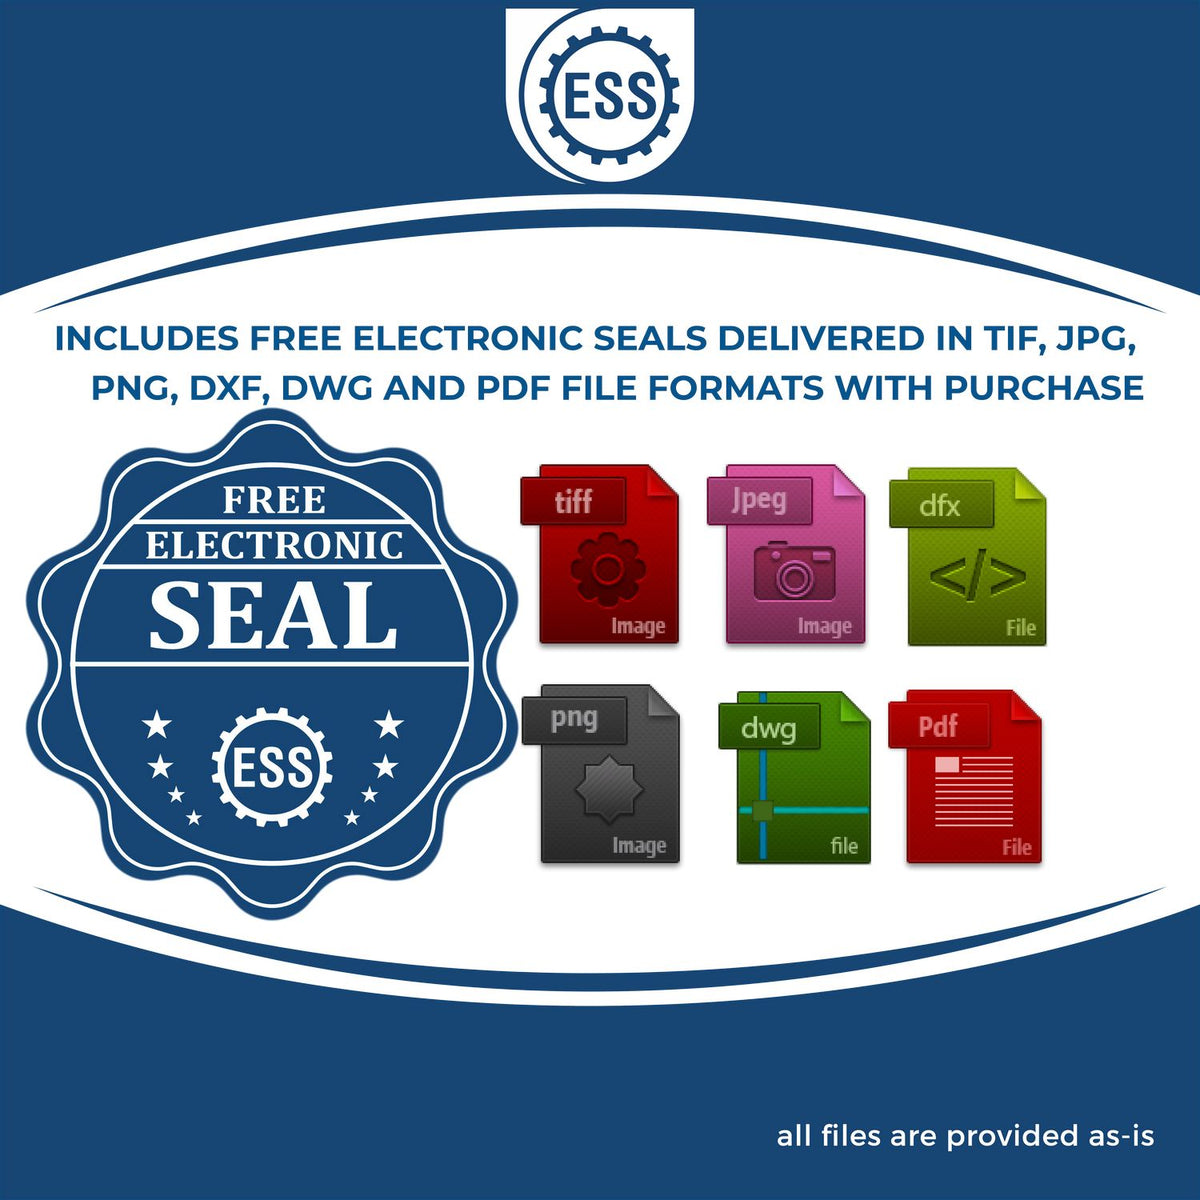 An infographic for the free electronic seal for the Heavy Duty Cast Iron Pennsylvania Geologist Seal Embosser illustrating the different file type icons such as DXF, DWG, TIF, JPG and PNG.